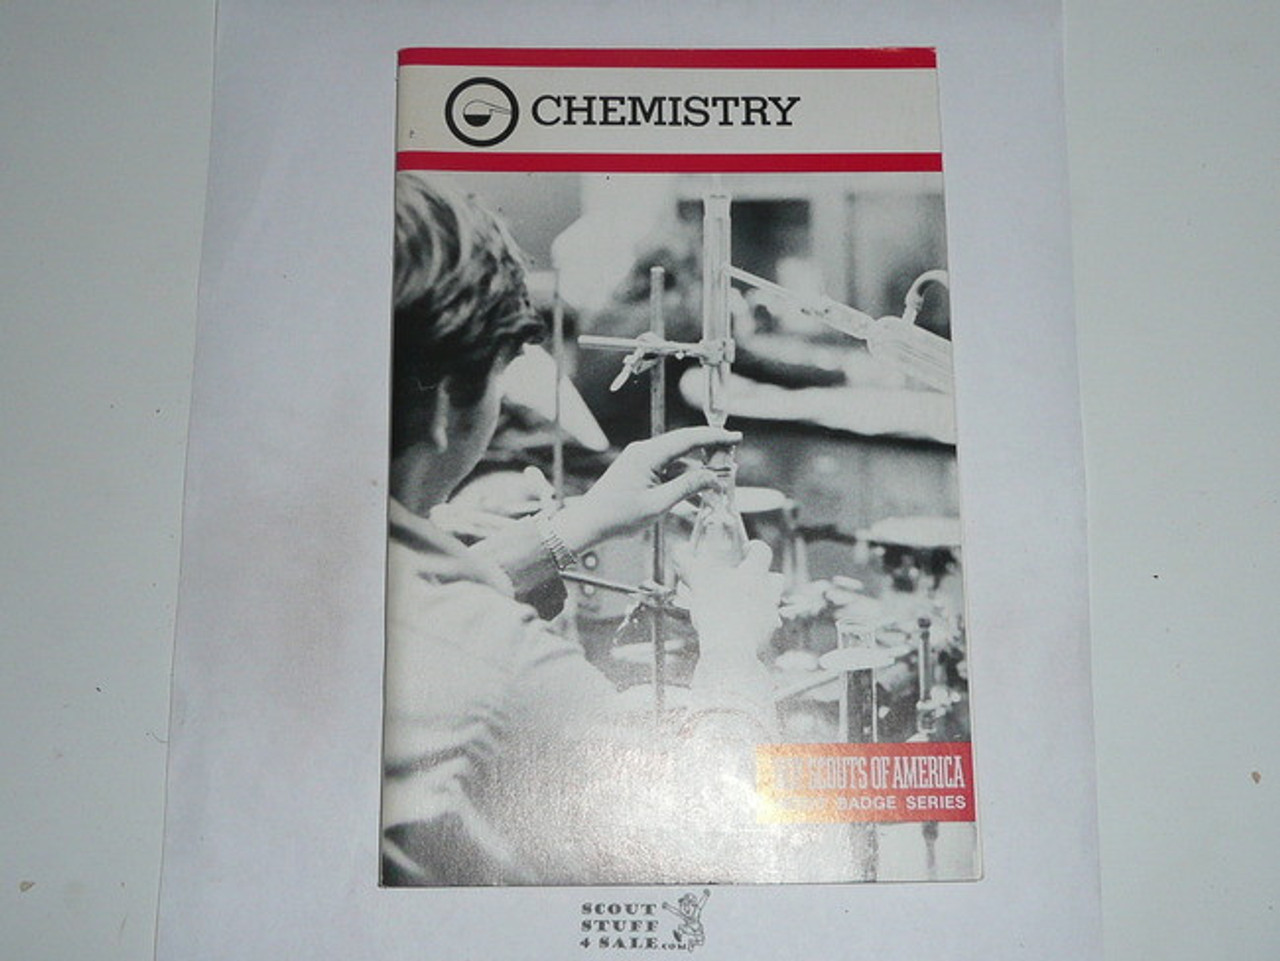 Chemistry Merit Badge Pamphlet, Type 9, Red Band Cover, 4-87 Printing